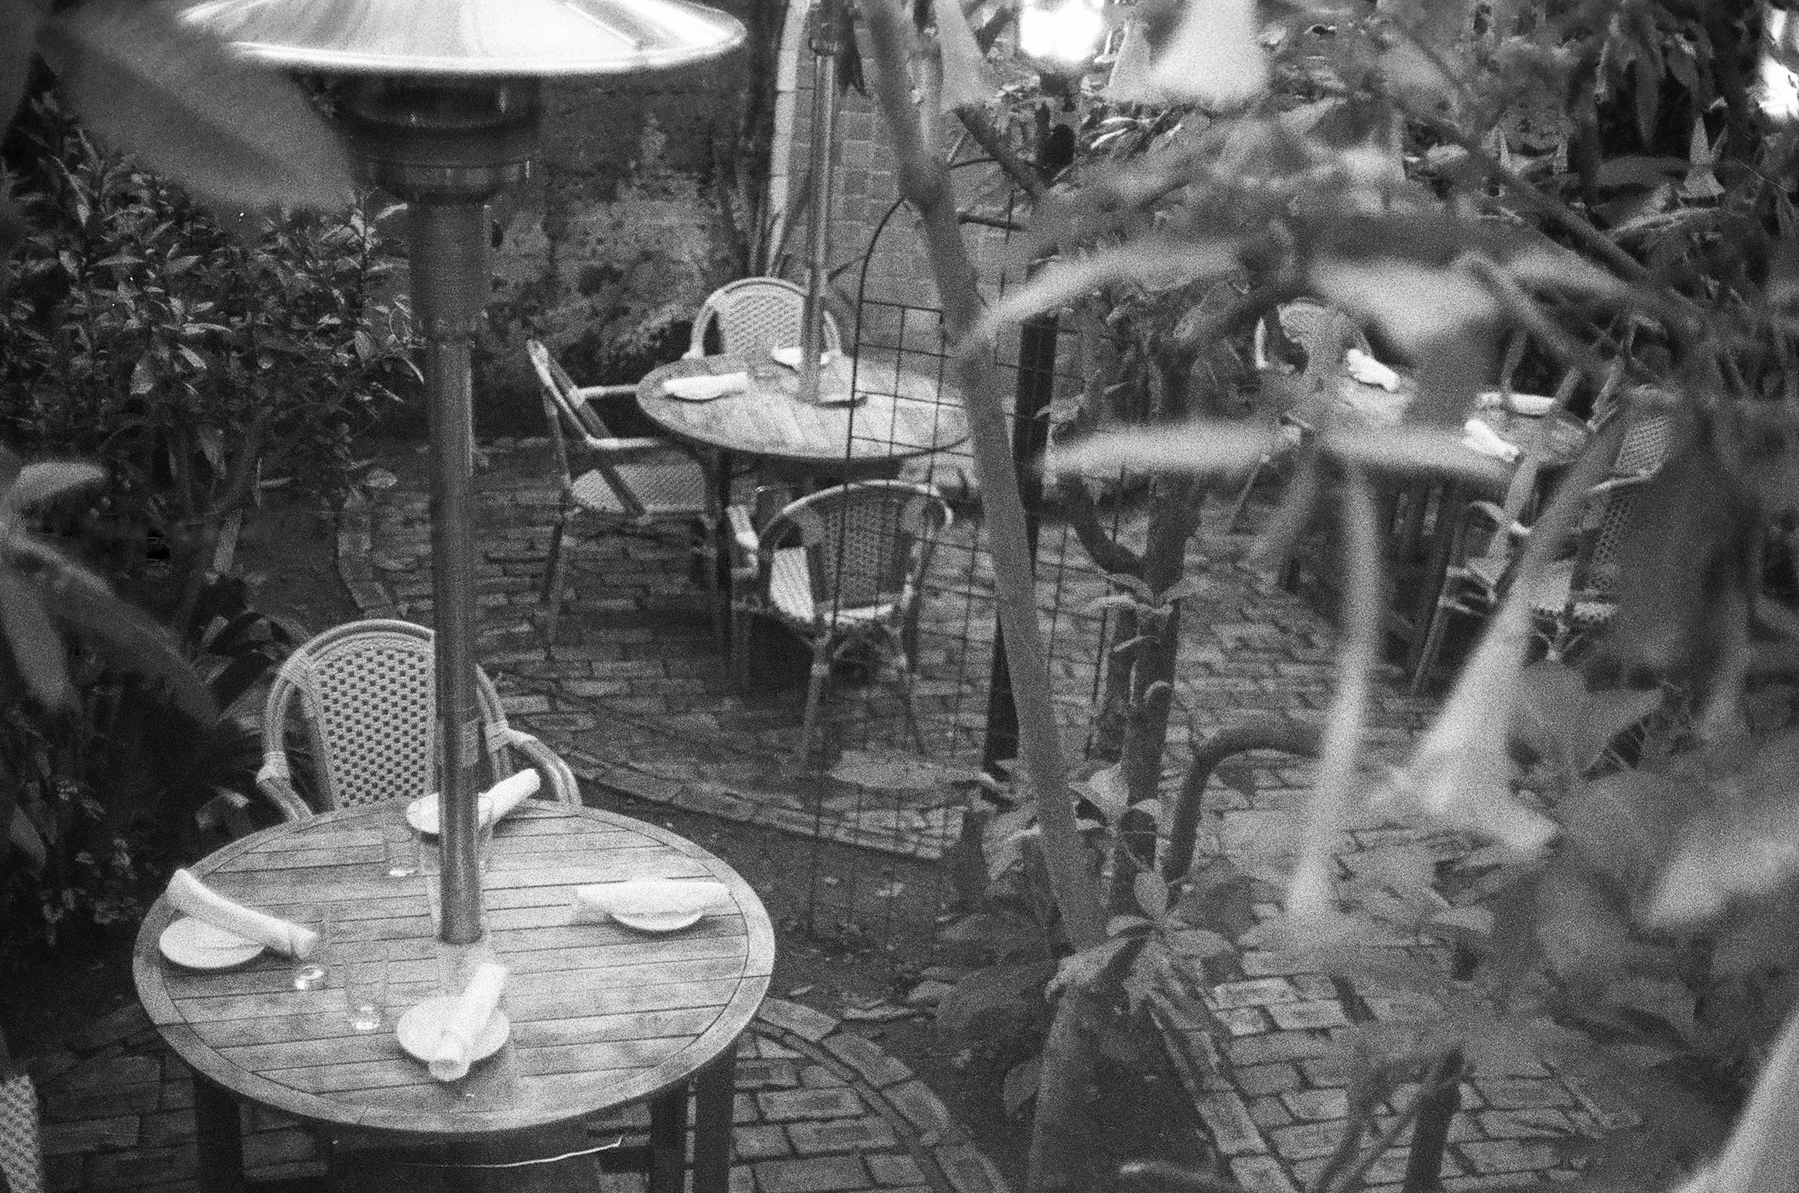 a scan of a black and white photo showing an outdoor garden dining space with space heaters